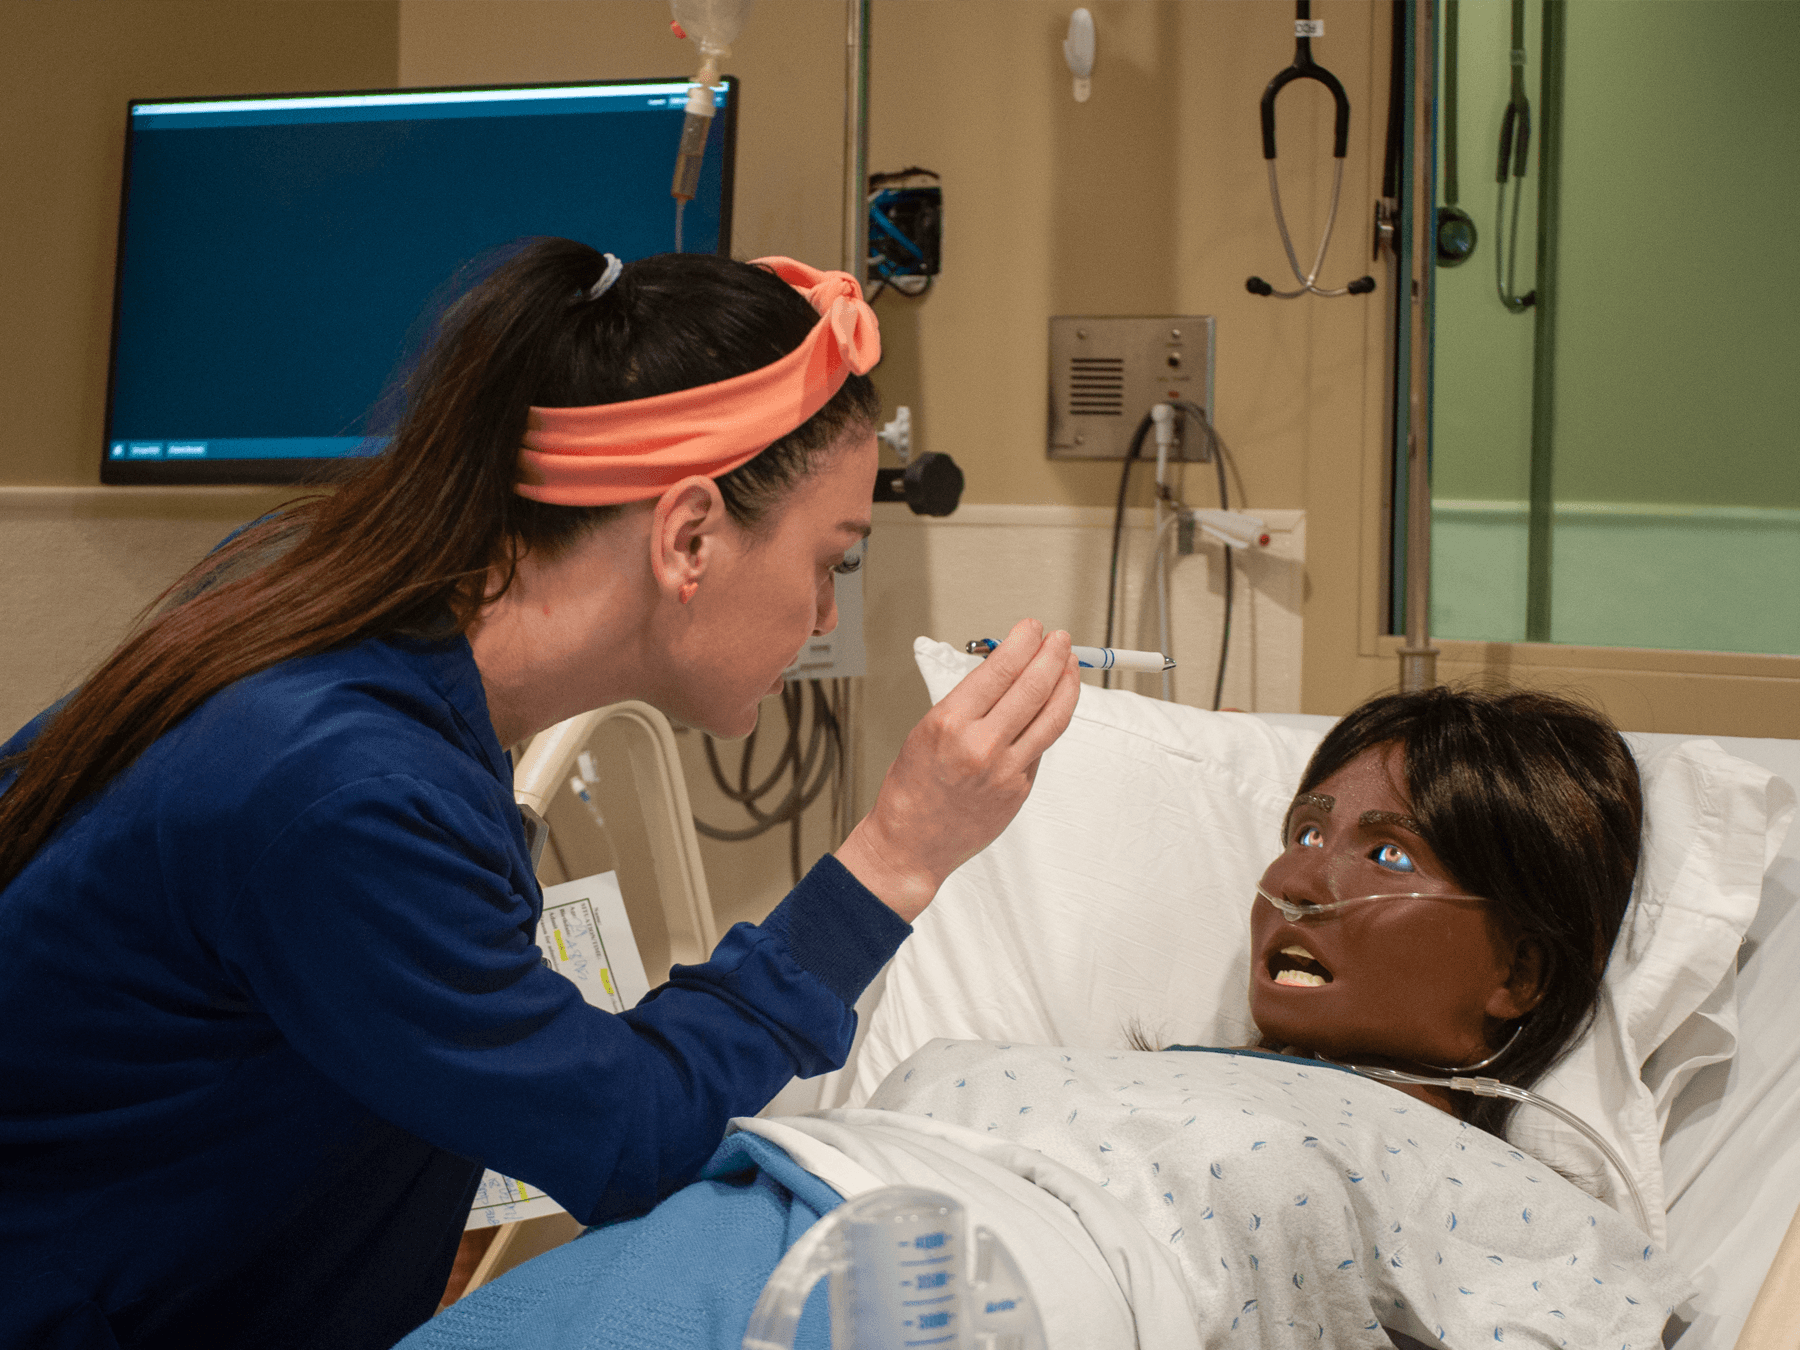 Kansas City nursing students awarded scholarships from The Research Foundation